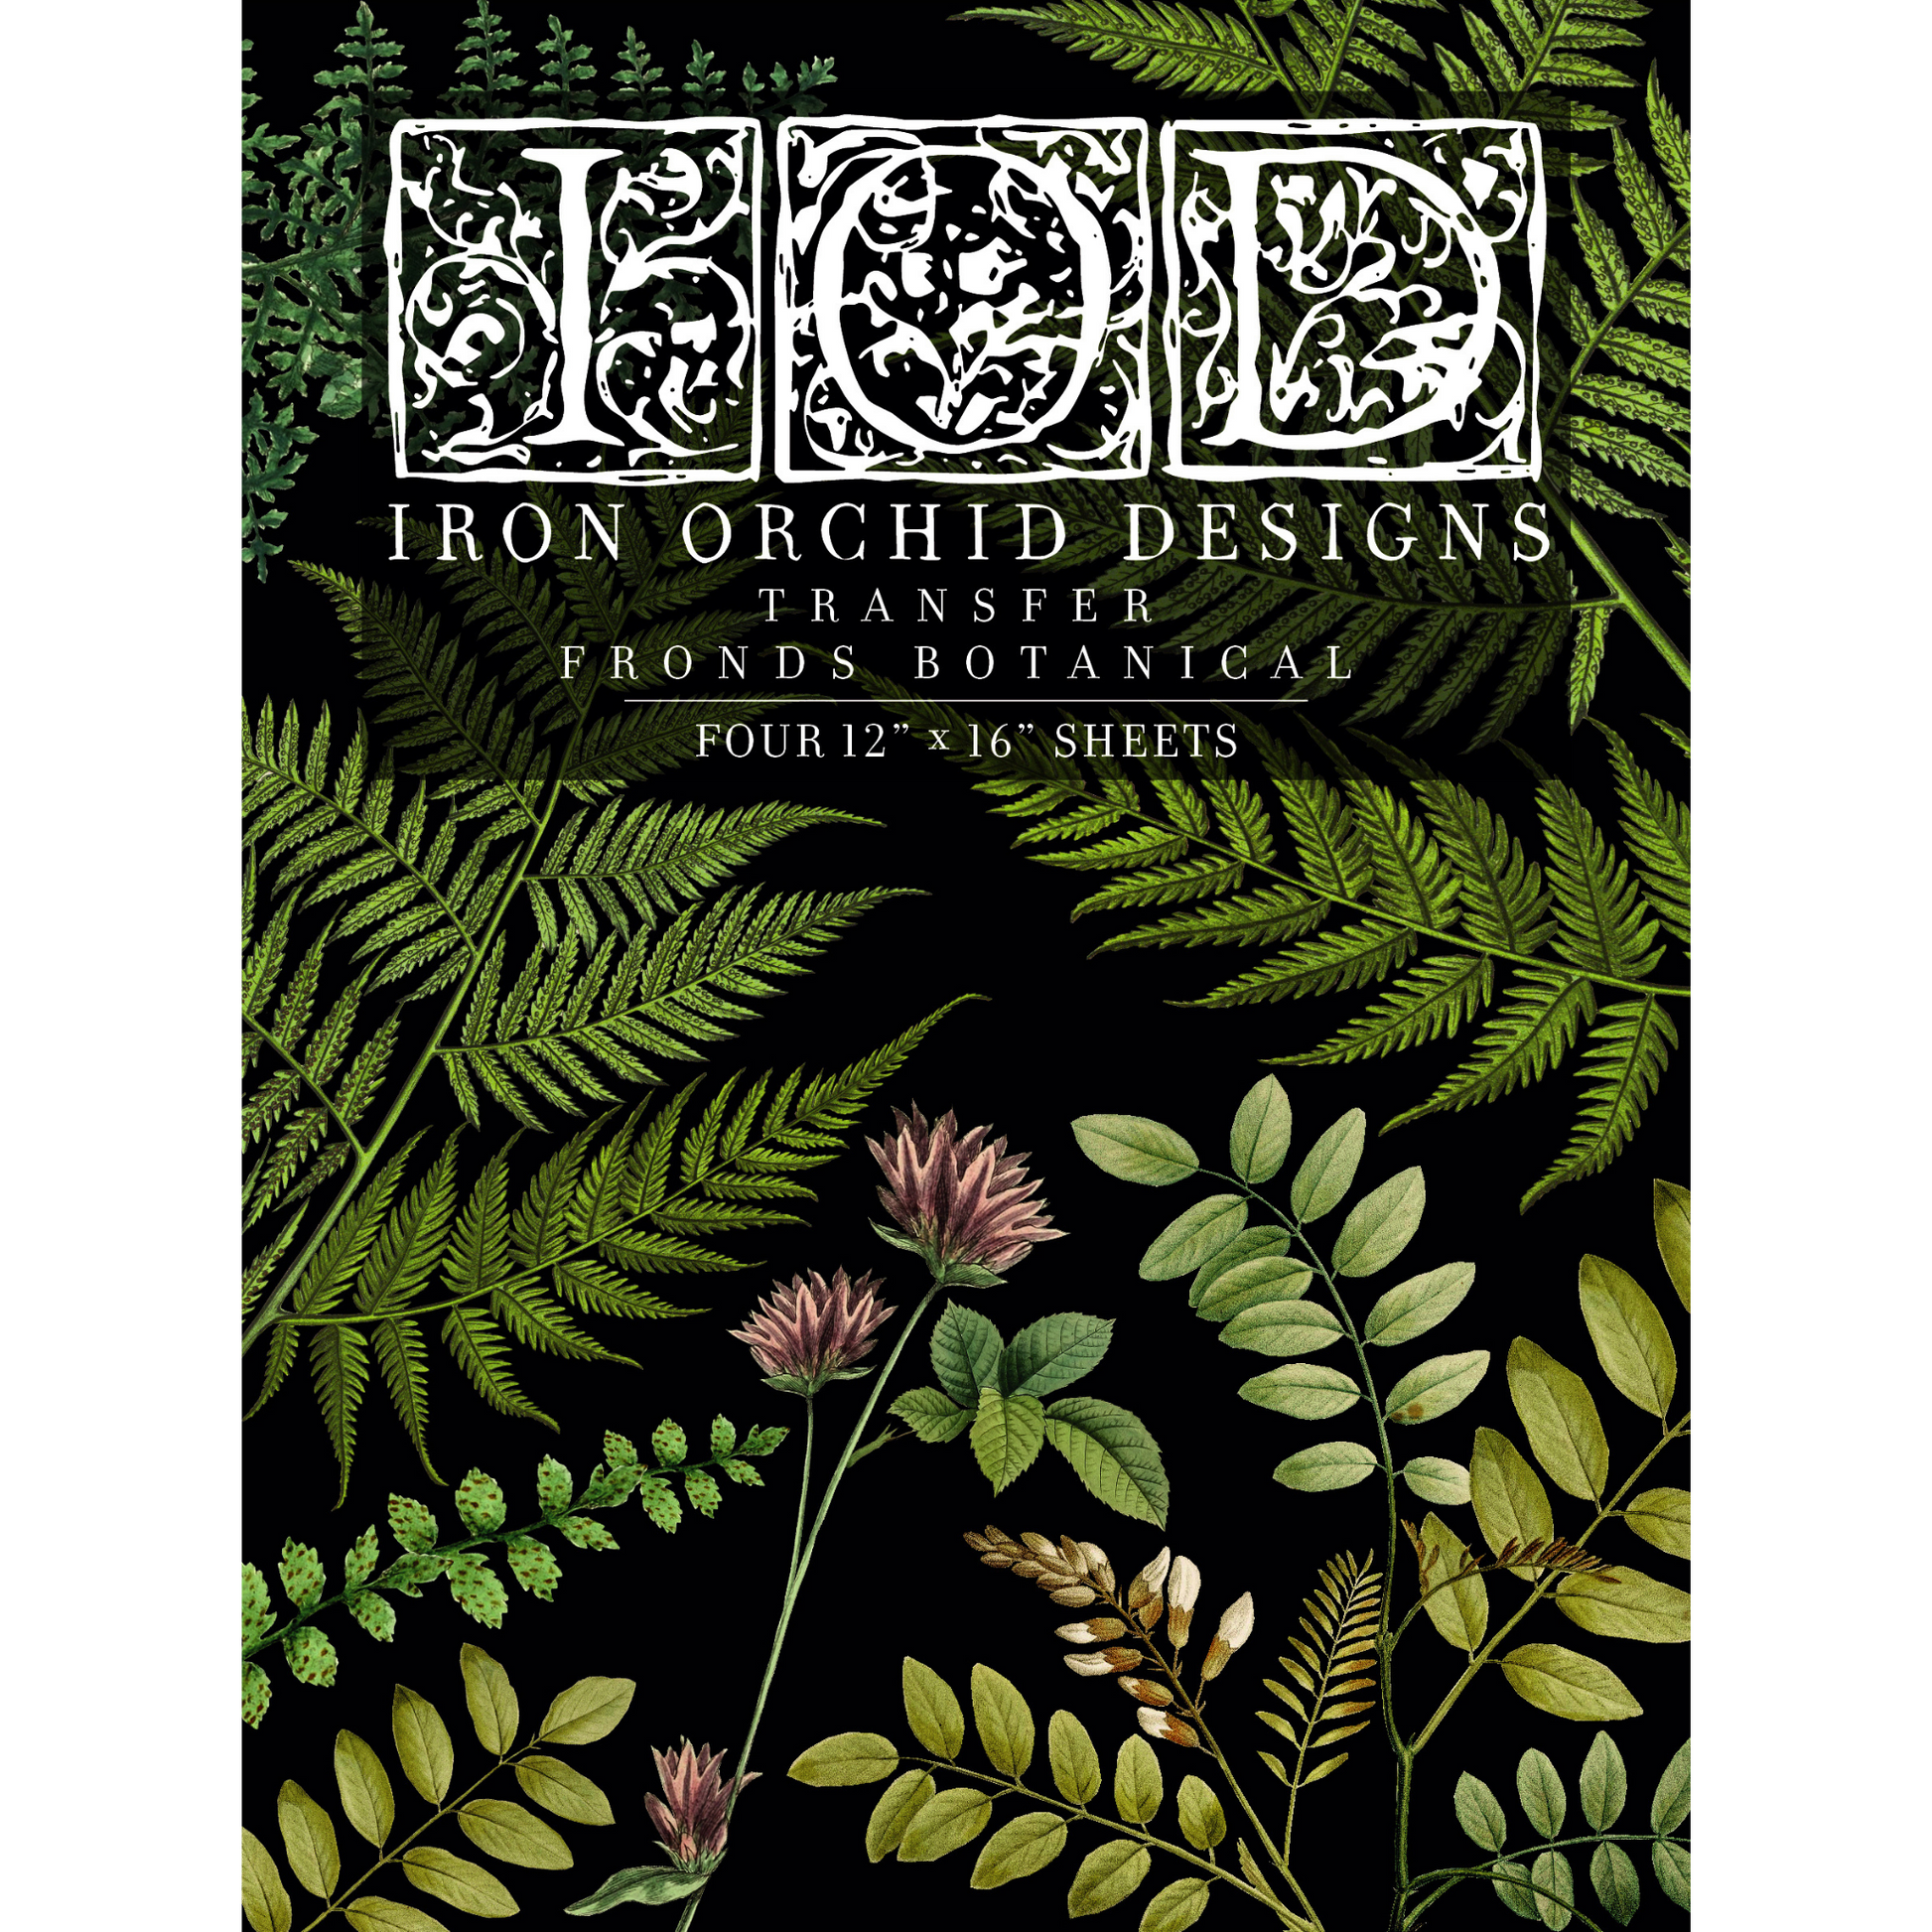 Fronds Botanical IOD Transfer by Iron Orchid Designs. Ferns, fronds and leaves in various shades of green-Cover photo front. Available at Milton's Daughter.